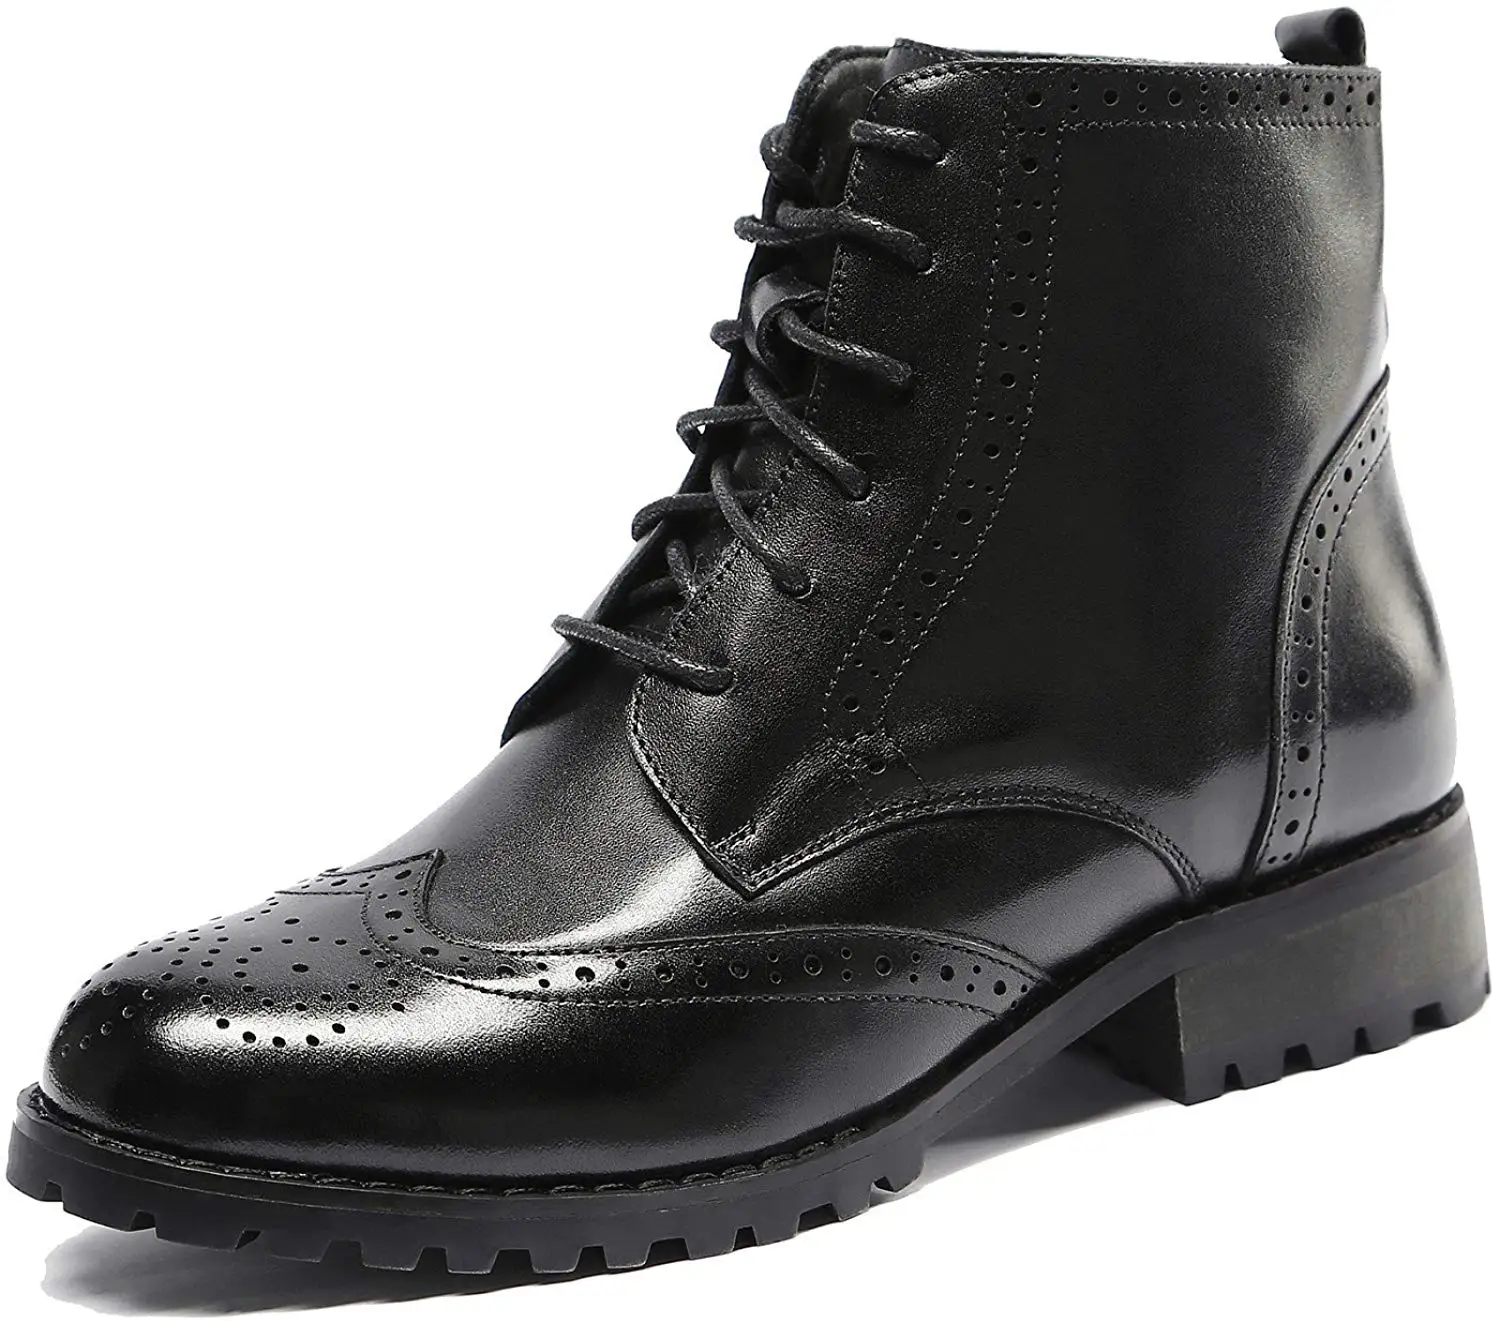 lace up oxford ankle boots